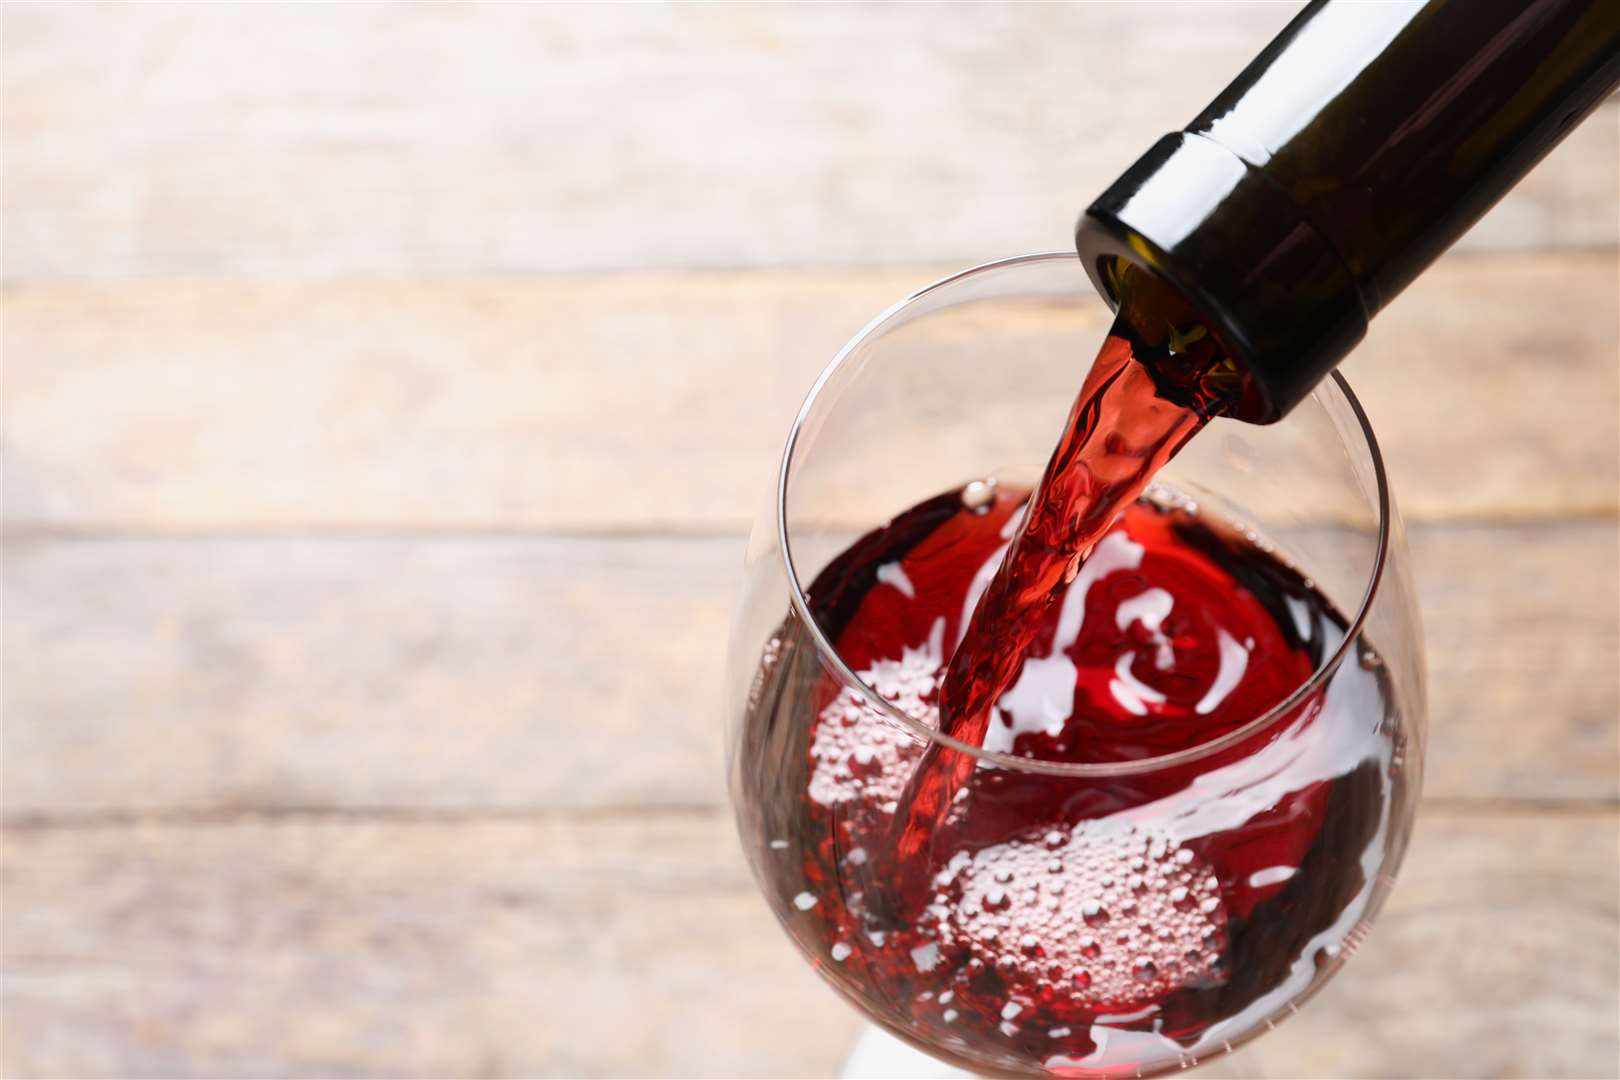 Has wine had its day or will it continue to stand the test of time?